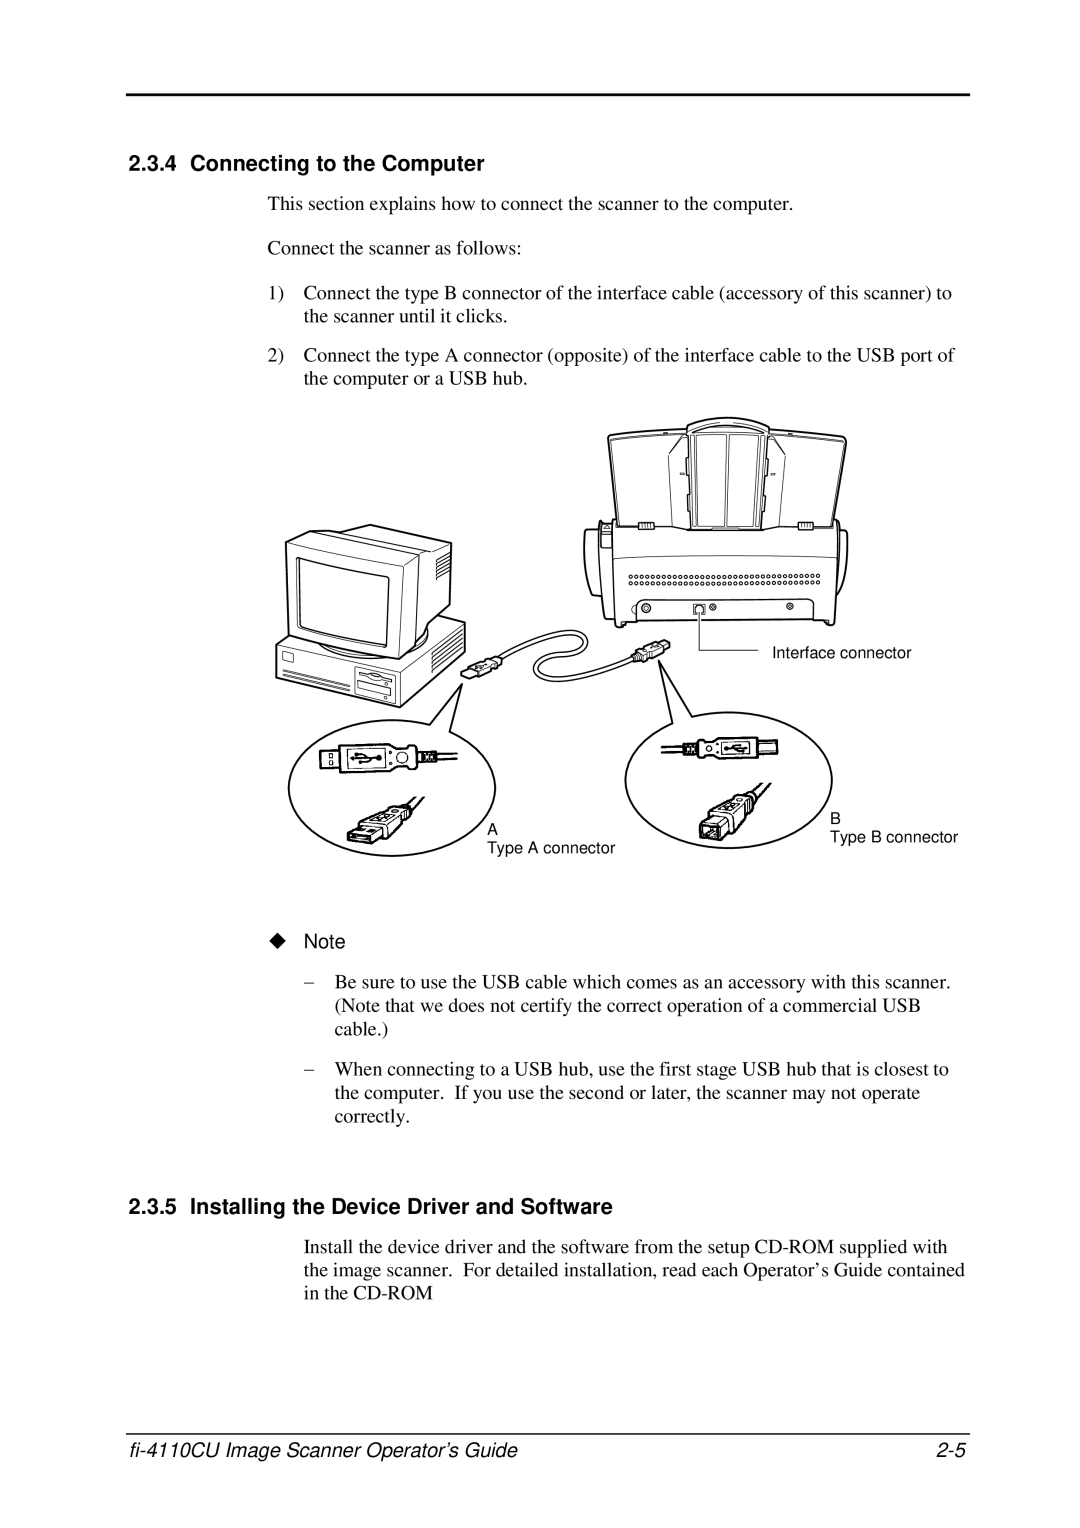 Fujitsu C150-E194-01EN manual Connecting to the Computer, Installing the Device Driver and Software 